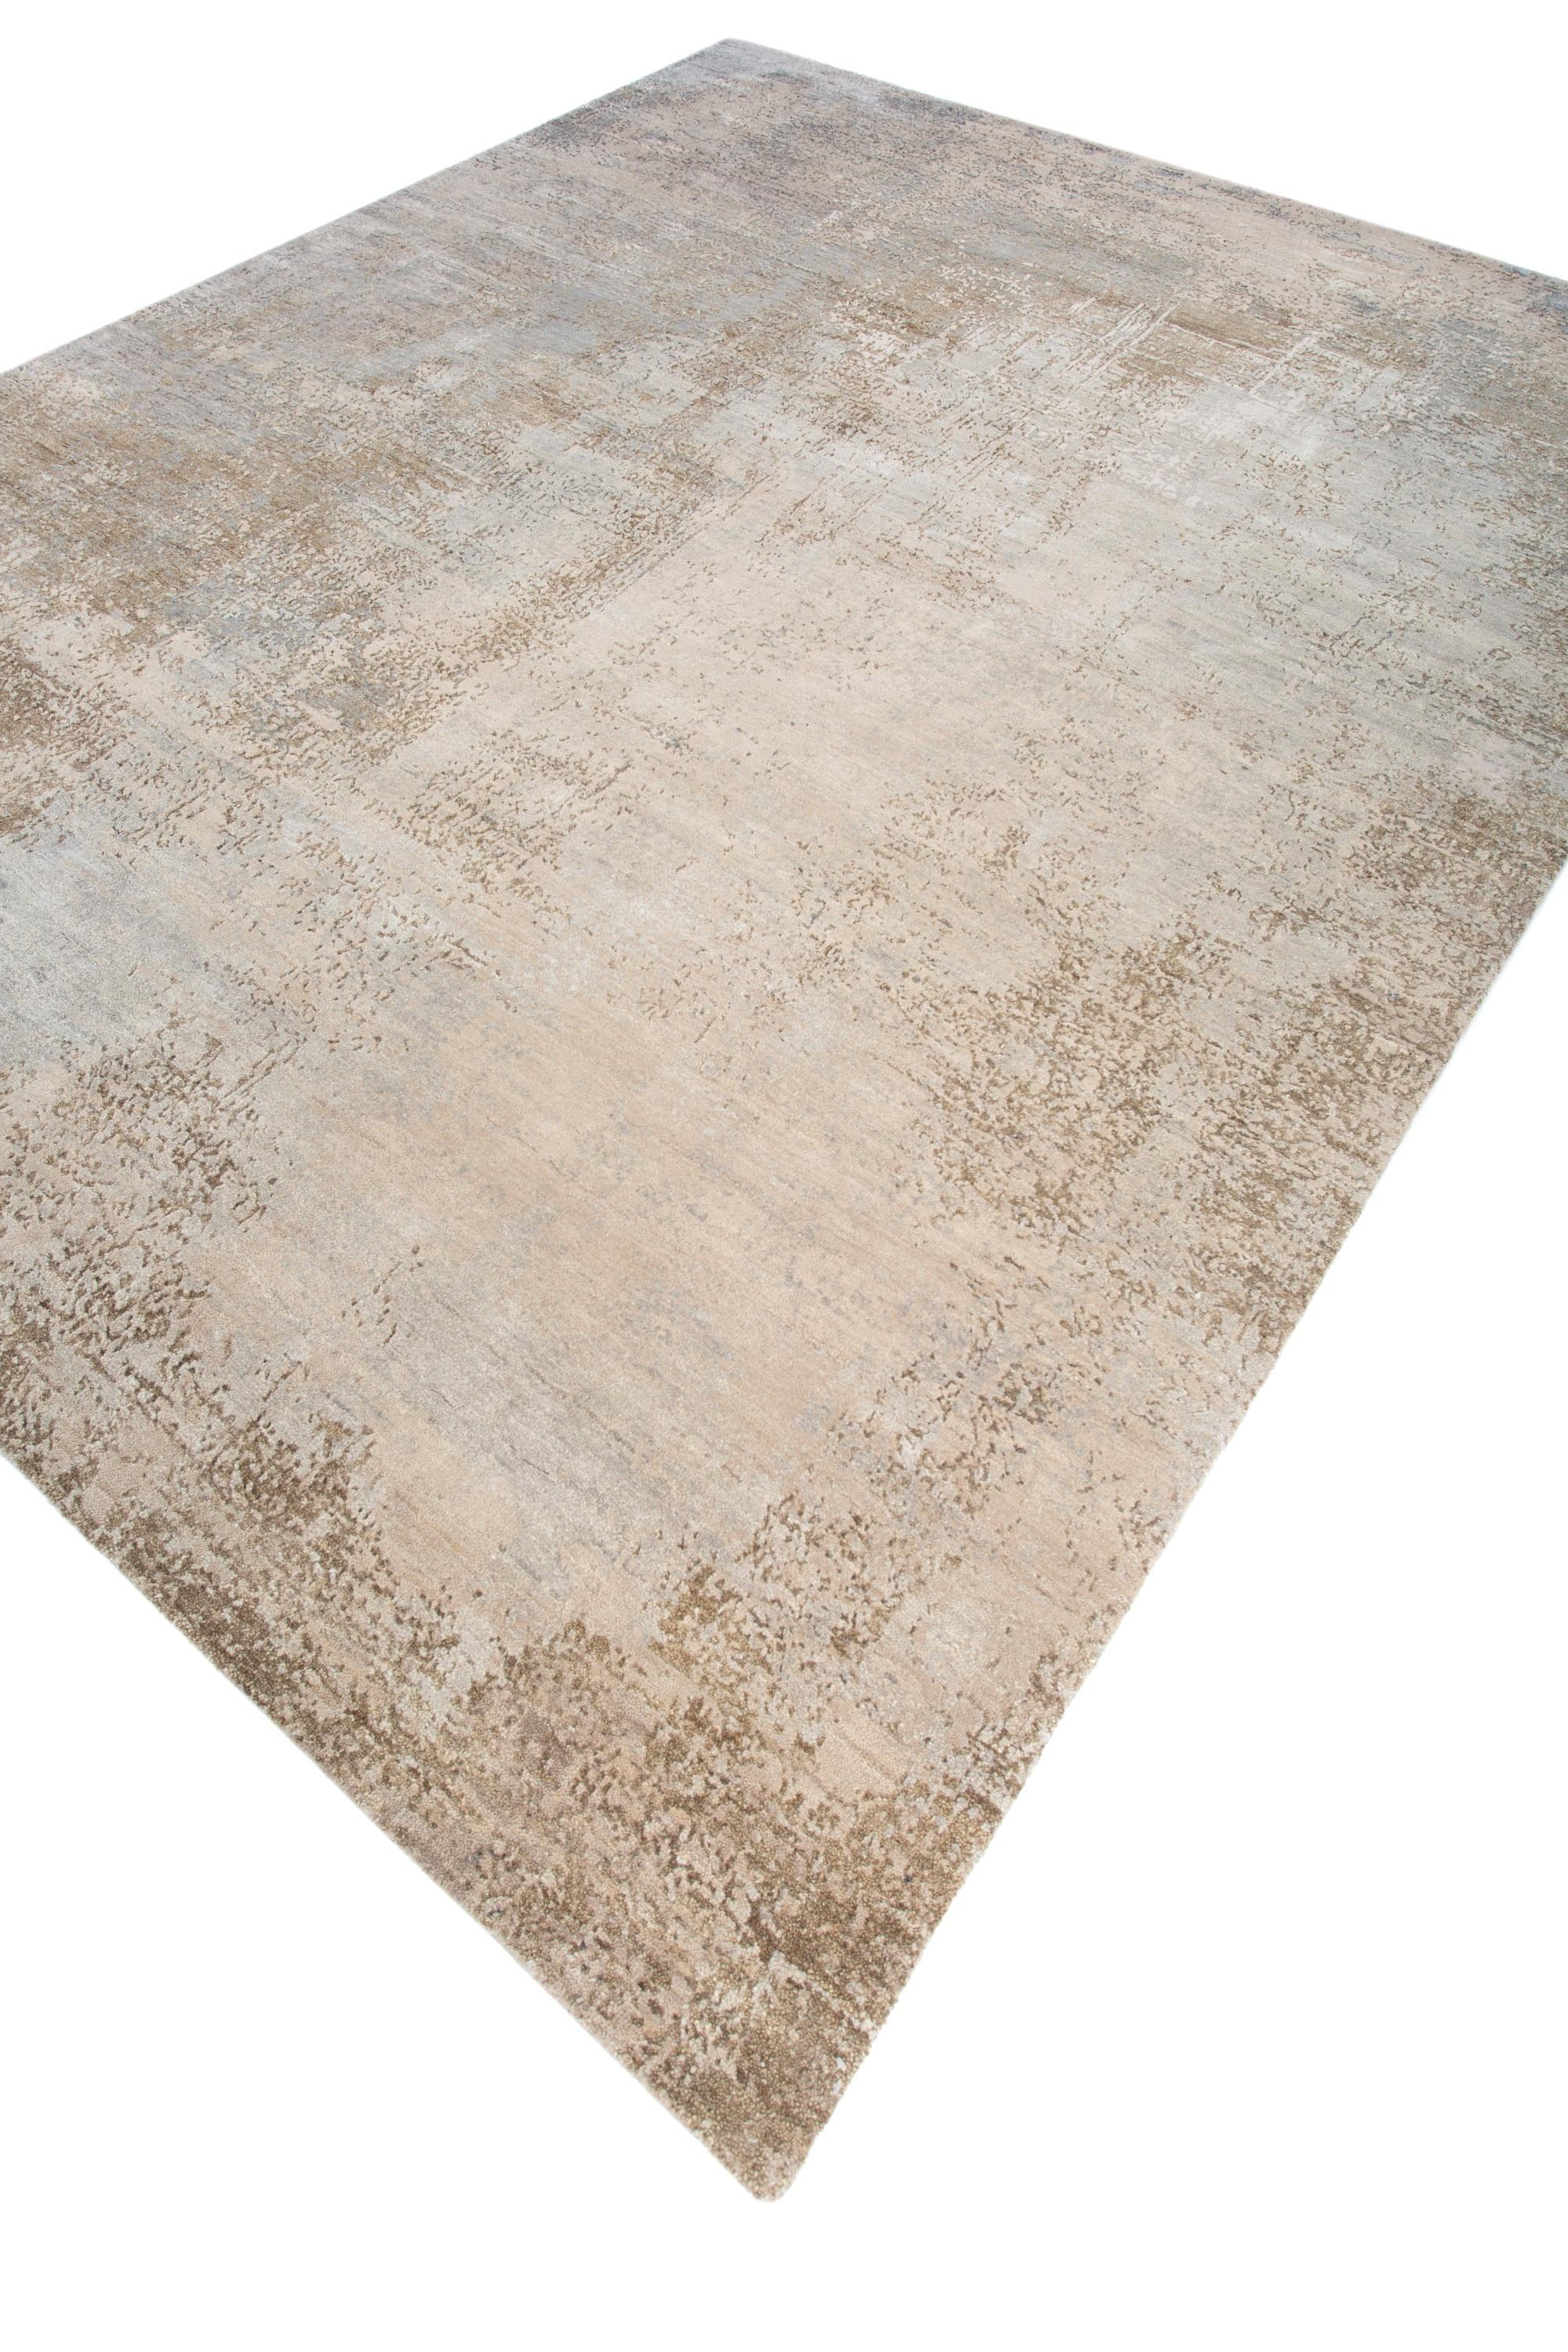 Modern Ethereal Mesh Dark Ivory & Nickel 200X300 Cm Handknotted Rug For Sale